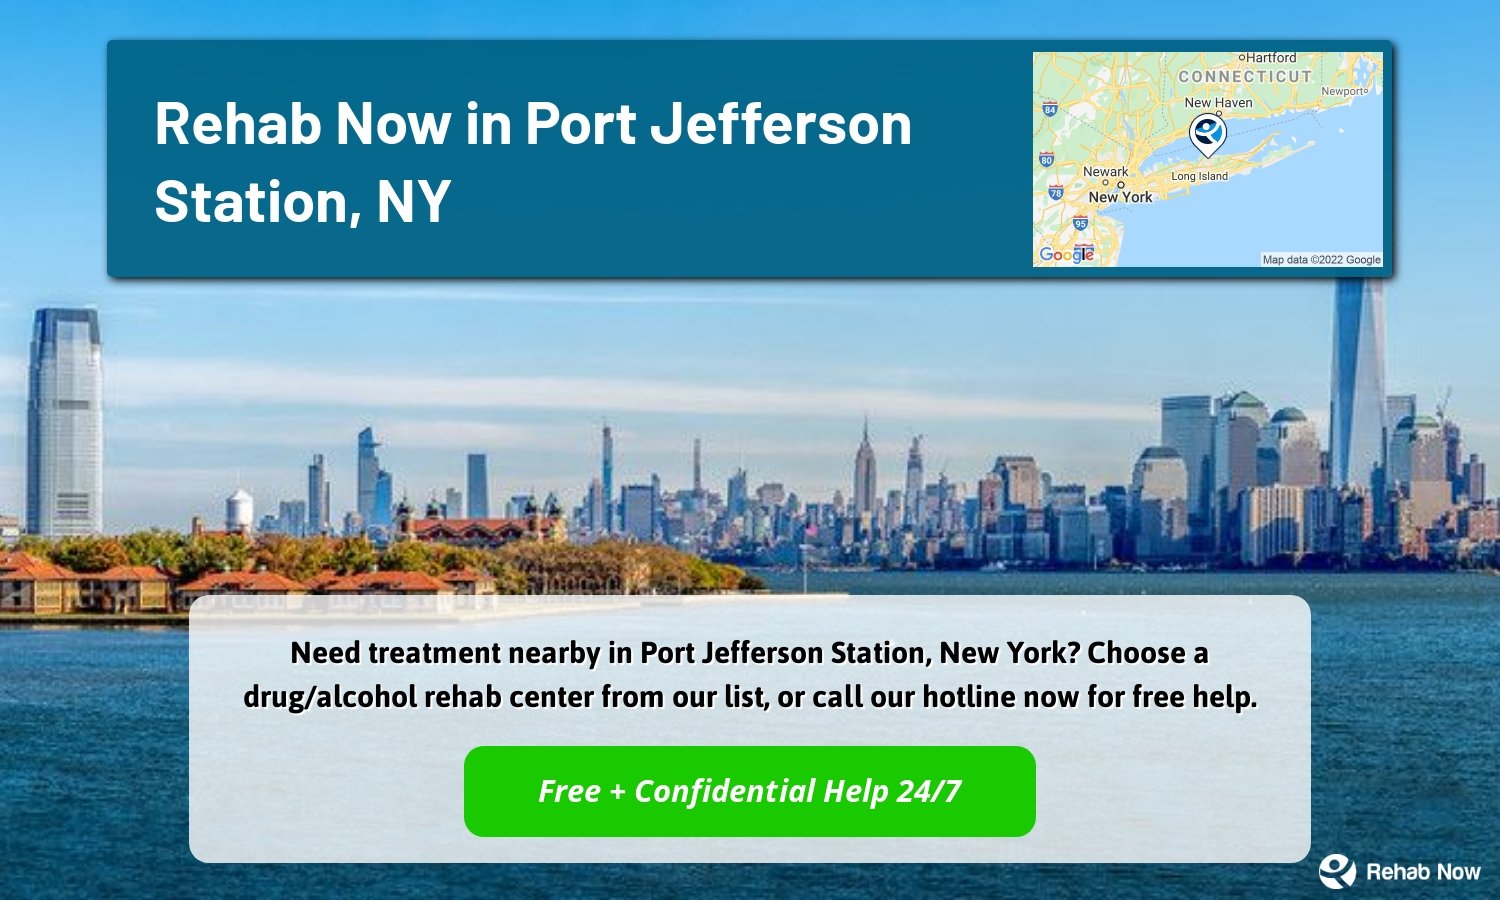 Need treatment nearby in Port Jefferson Station, New York? Choose a drug/alcohol rehab center from our list, or call our hotline now for free help.